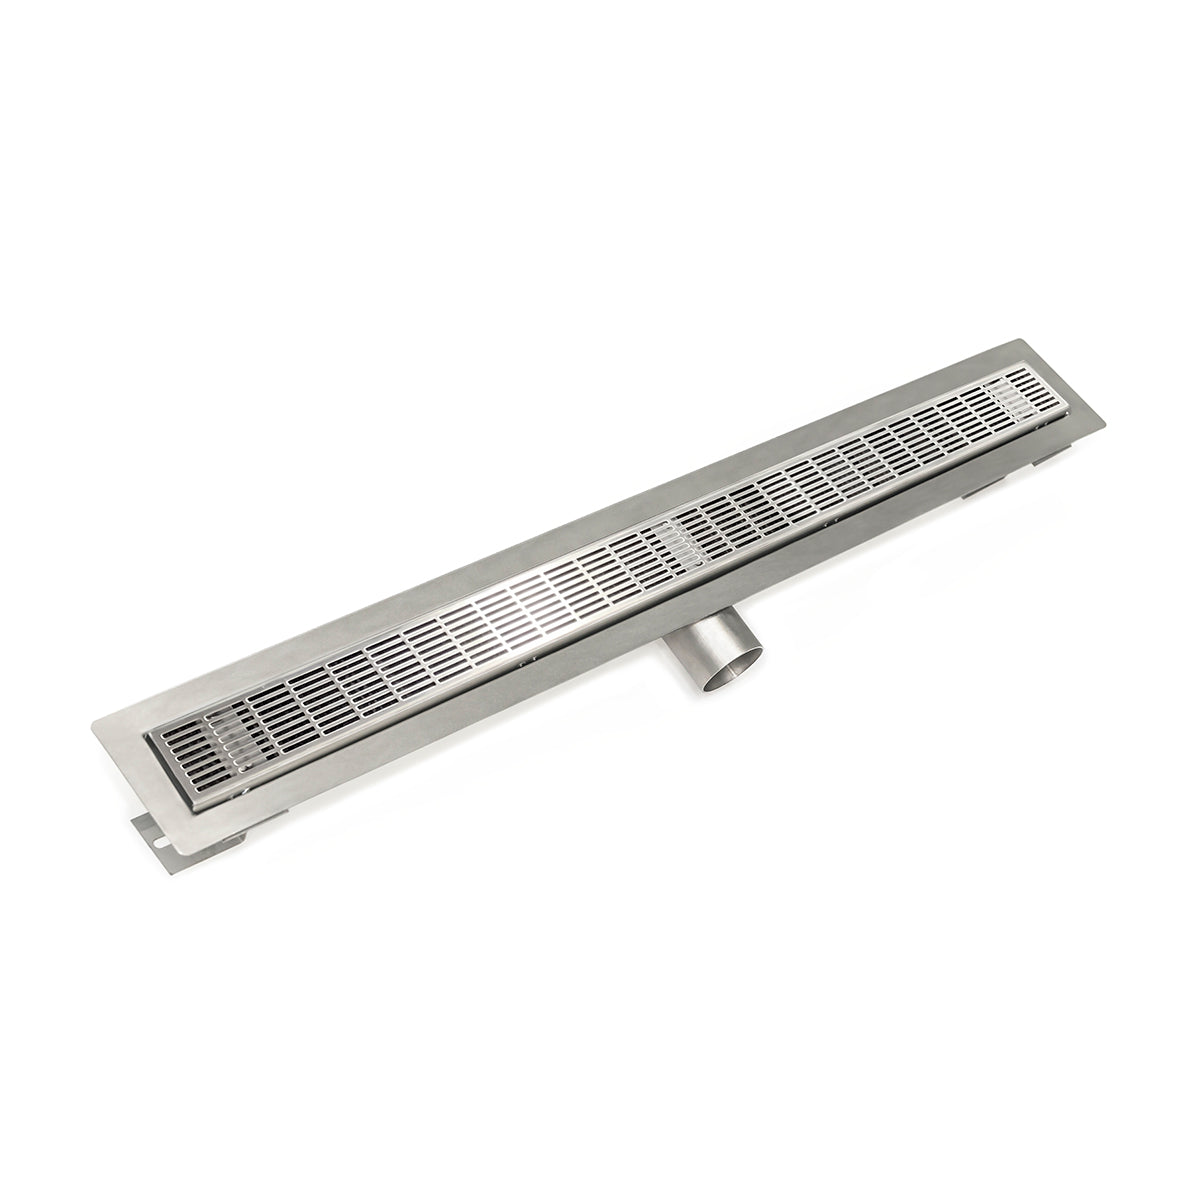 Infinity Drain 36" FT Series Side Outlet Linear Drain Kit with 2 1/2" Perforated Slotted Grate